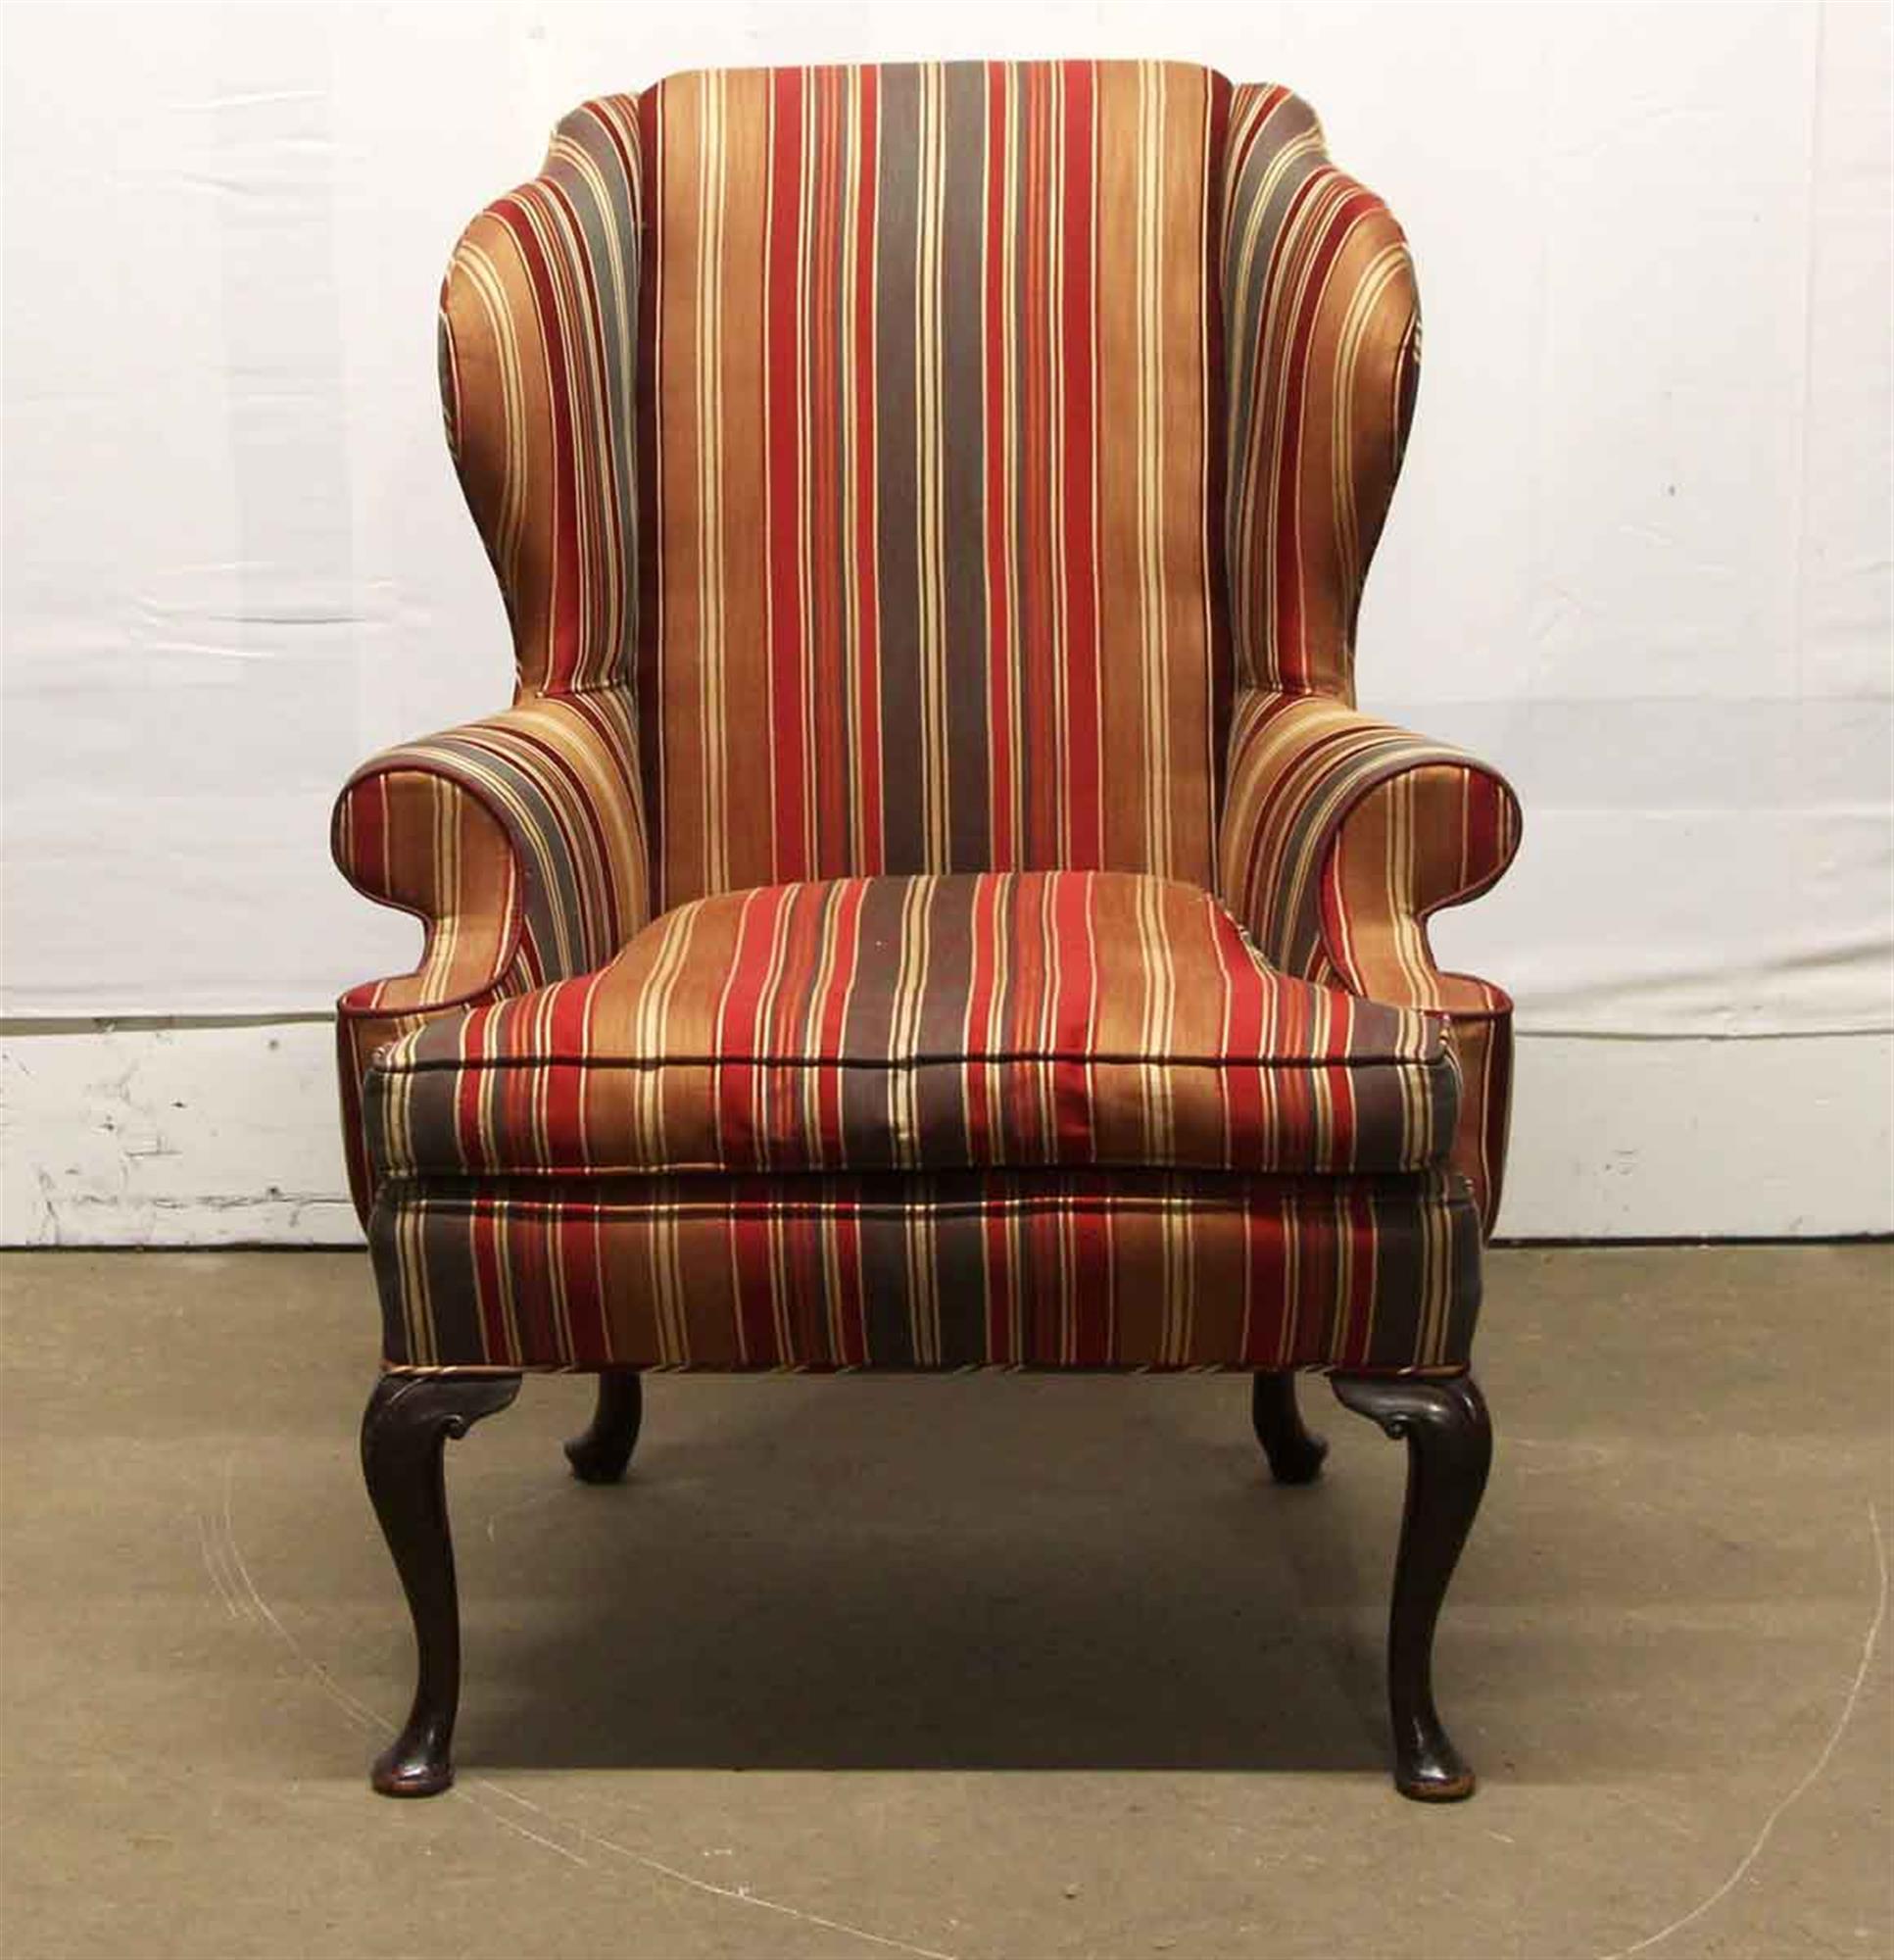 Wing back chair with red, tan and brown stripes and dark tone carved wooden cabriole legs. The wood has some scratches and will need minor refinishing. This can be seen at our 400 Gilligan St location in Scranton, PA.